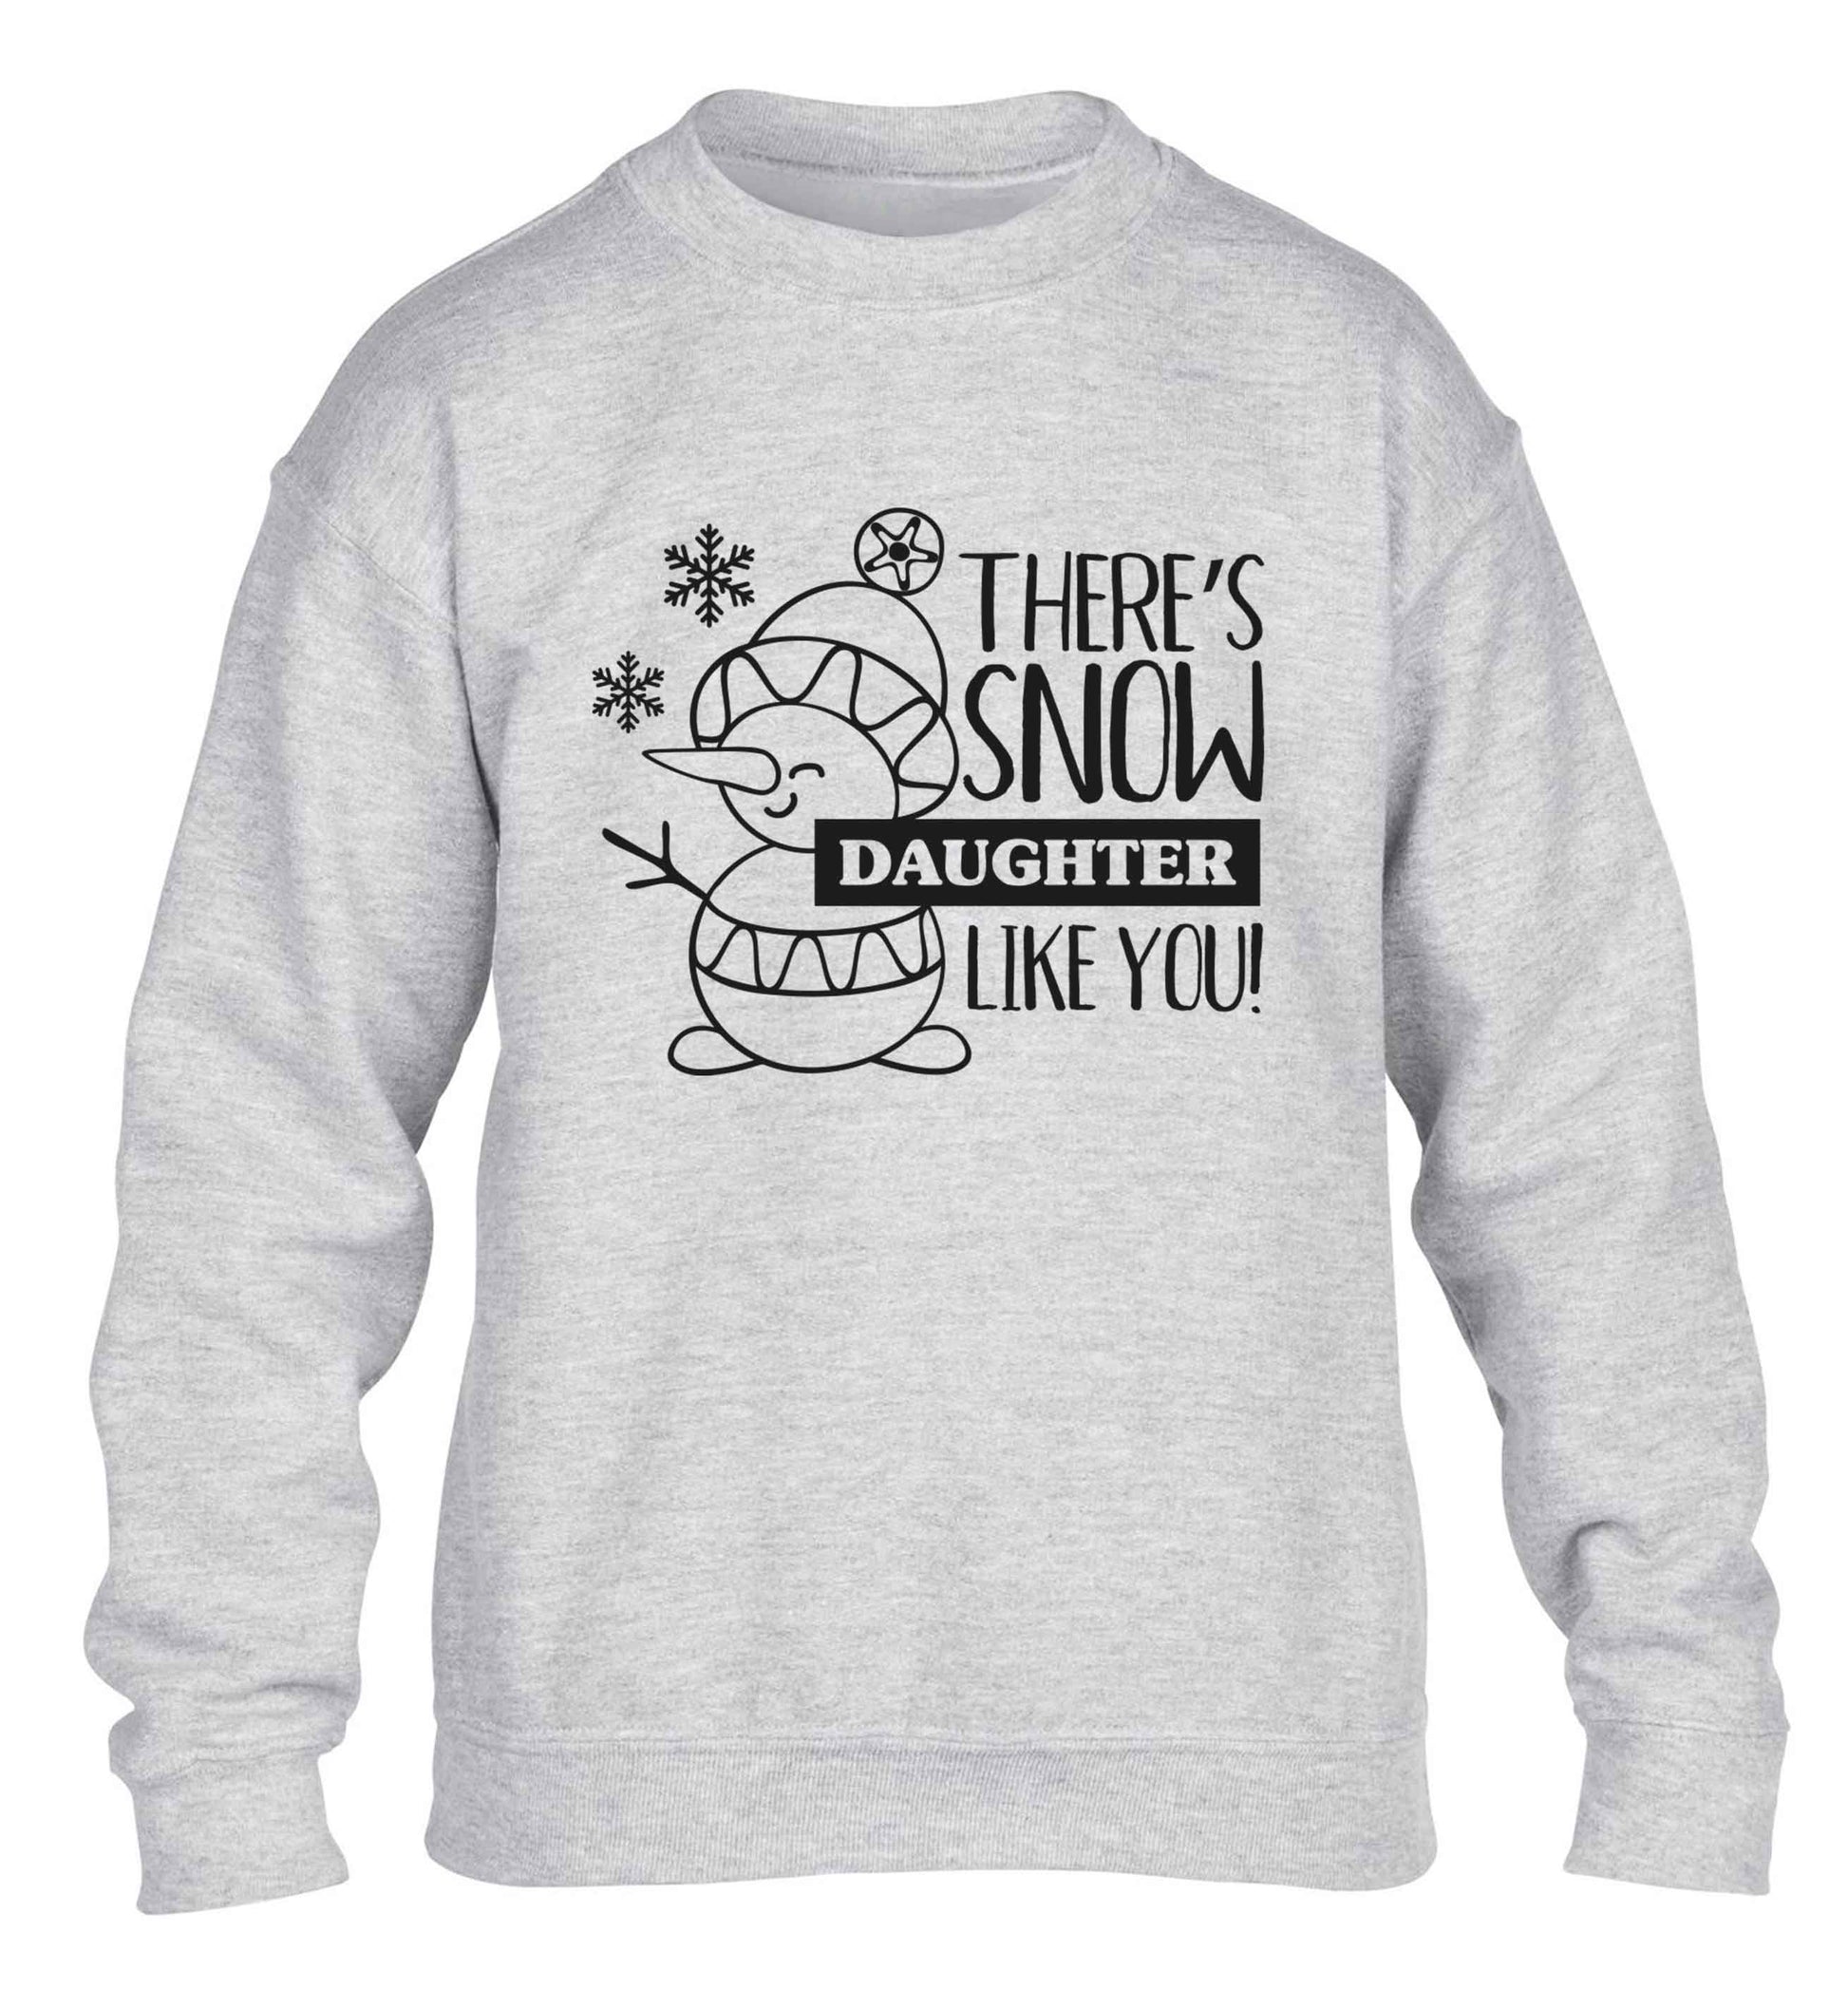 There's snow daughter like you children's grey sweater 12-13 Years